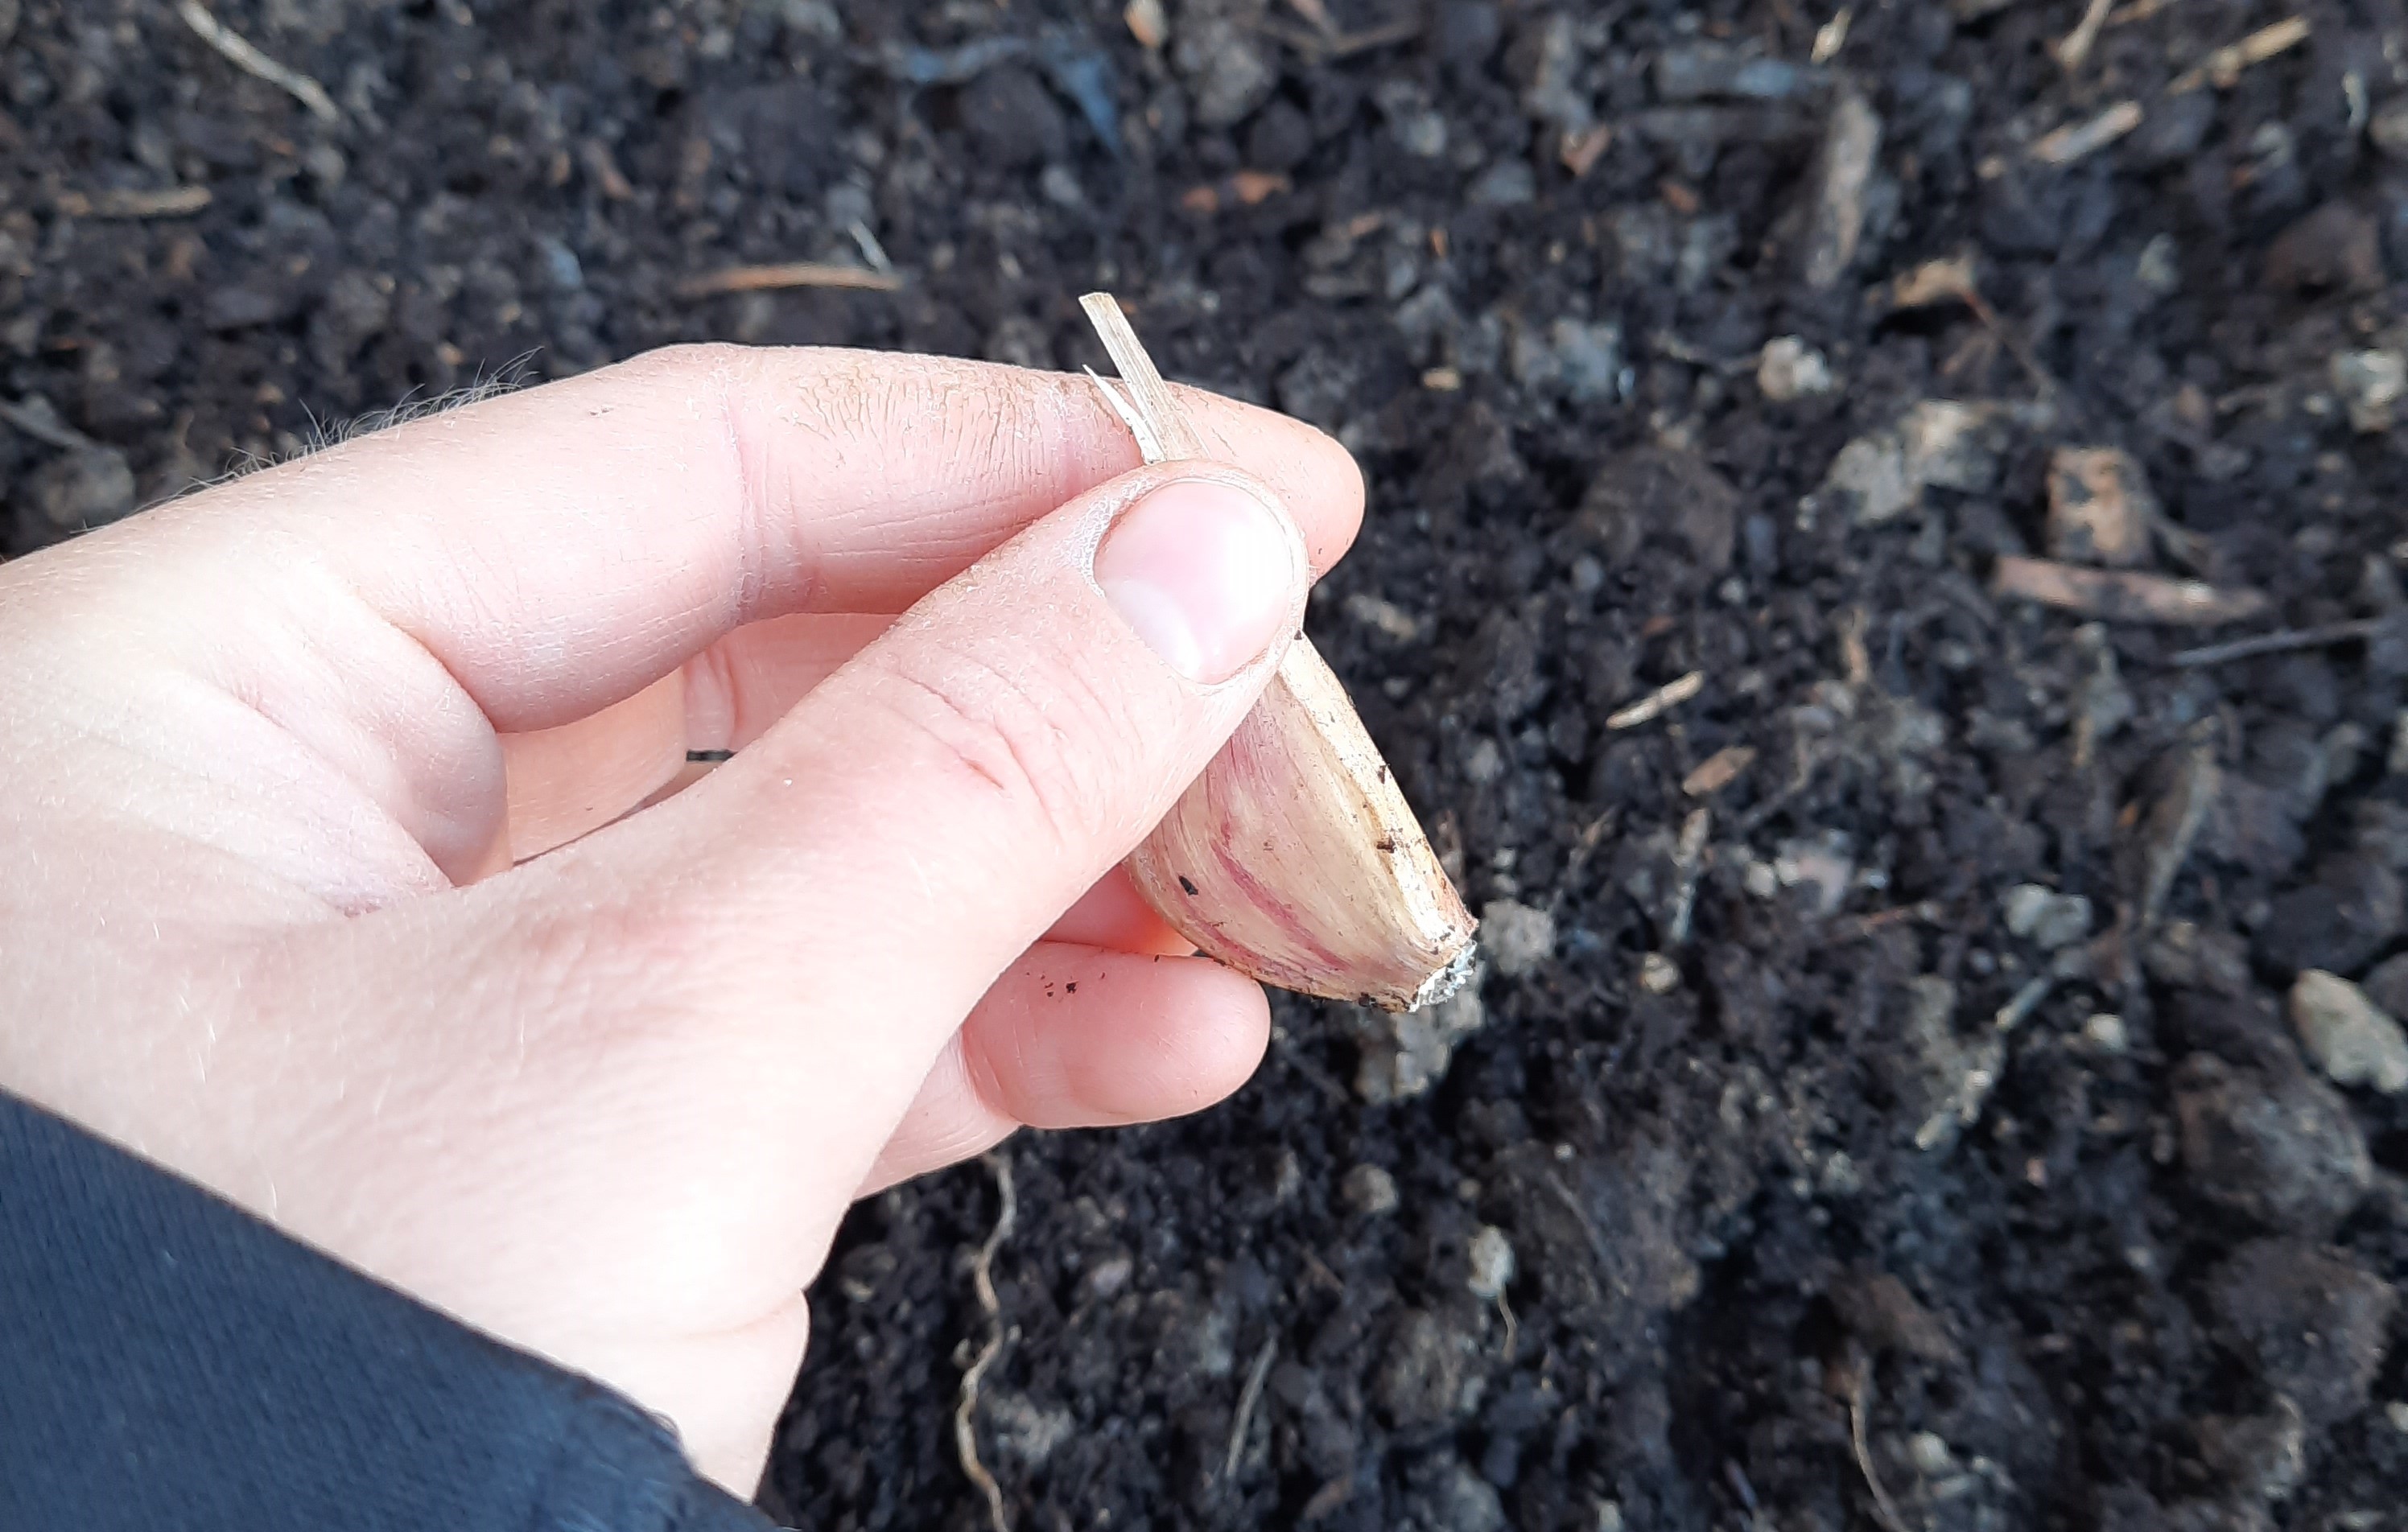 A hand holding a garlic bulb ready for planting